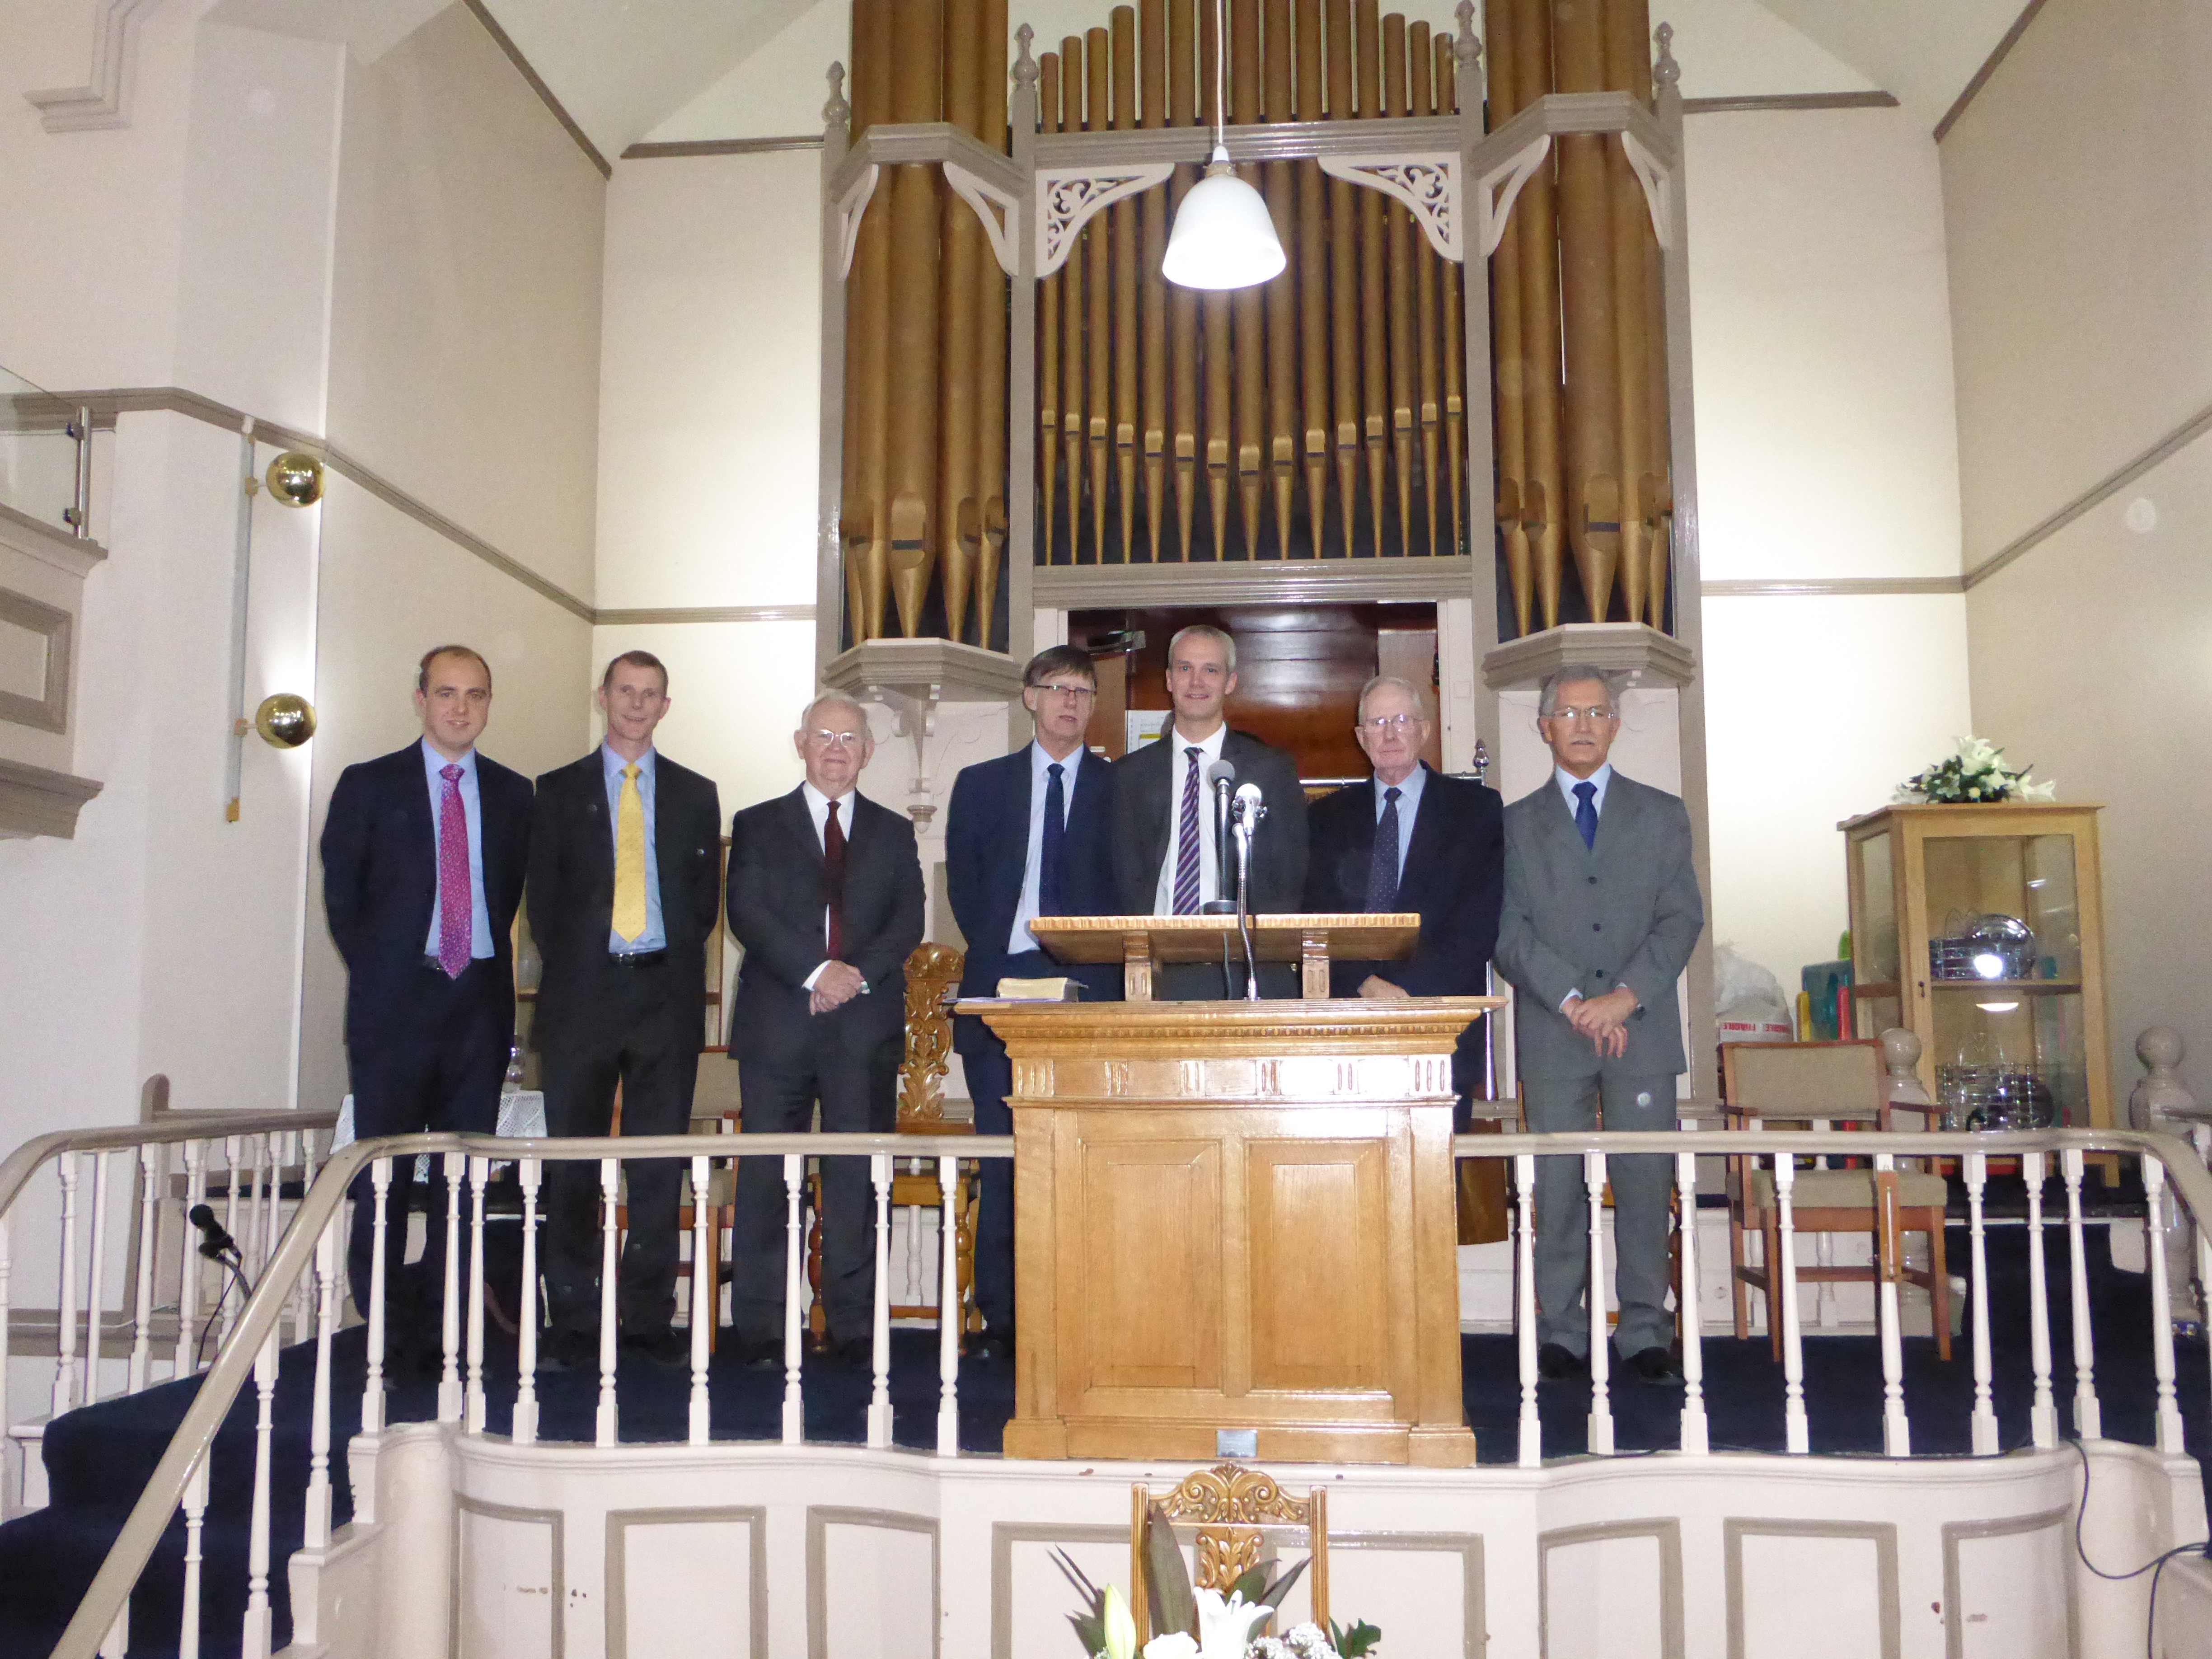 Speakers at the ordination and induction of James Allan as pastor of Hebron